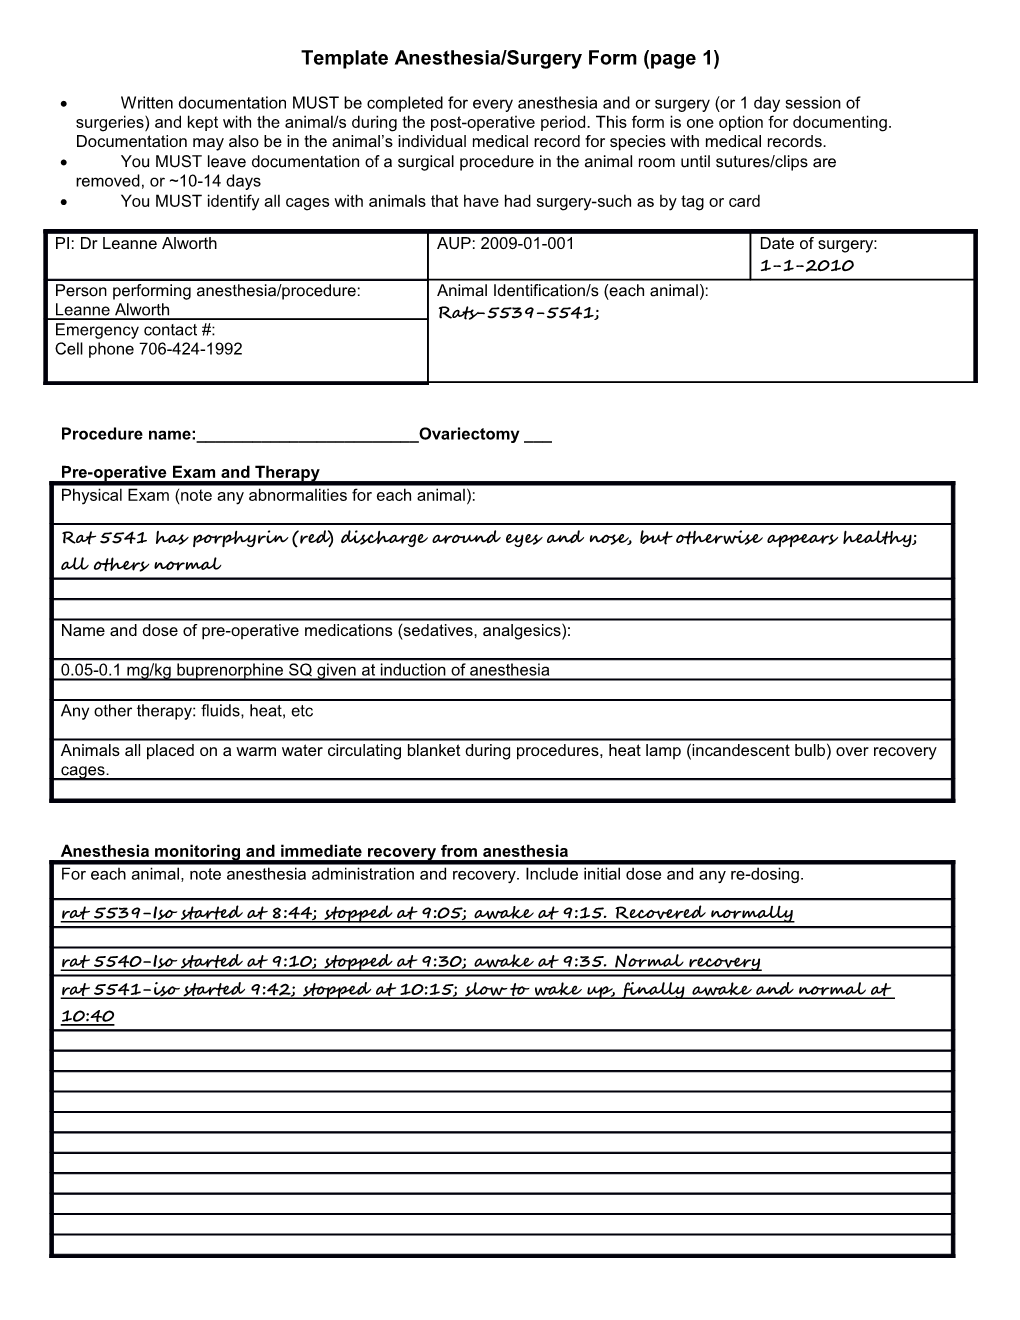 Template Anesthesia/Surgery Form (Page 1) s1